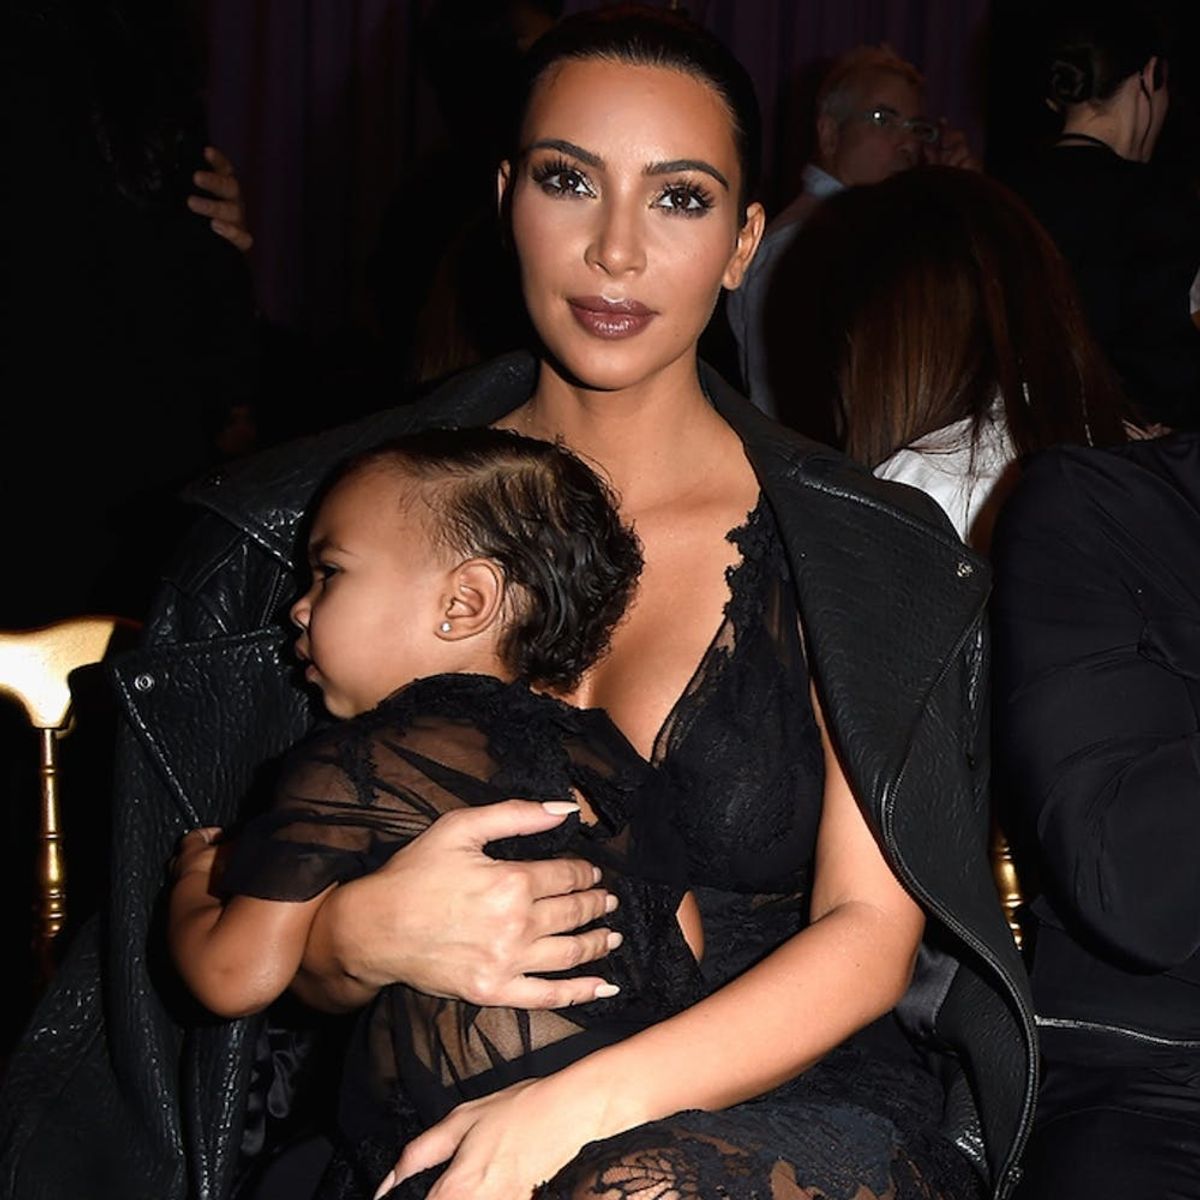 North West and Kanye Were NOT Helpful While Baby Shopping With Chrissy Teigen